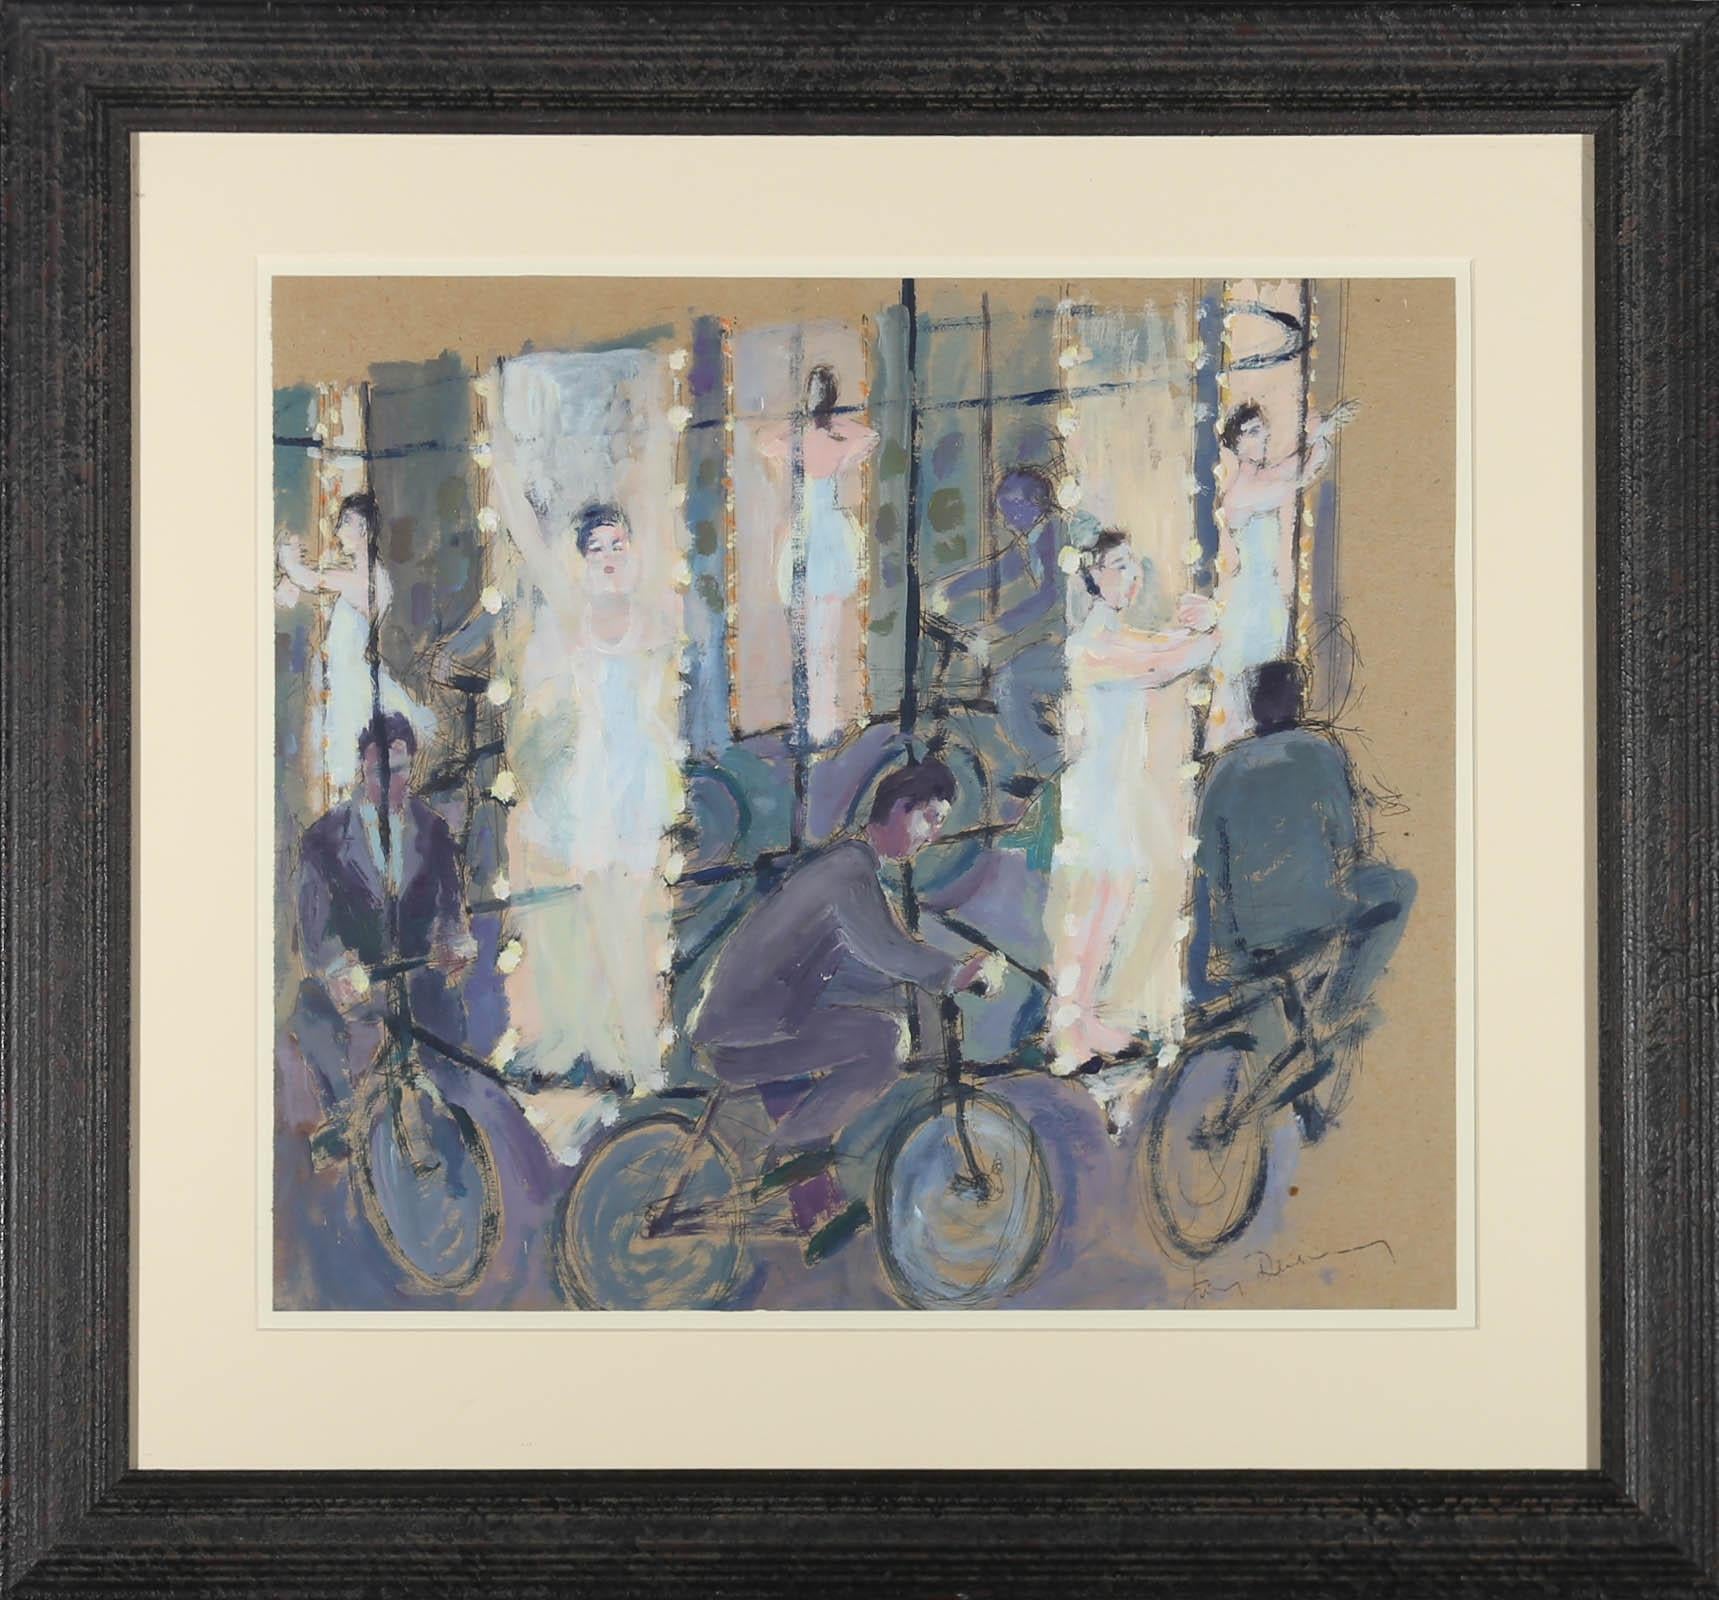 A striking surrealist study depicting a dancer and a cyclist in a mirrored hall. Captured in gouache with ink markings. Signed to the lower right. Presented in a black wooden frame. On paper.
